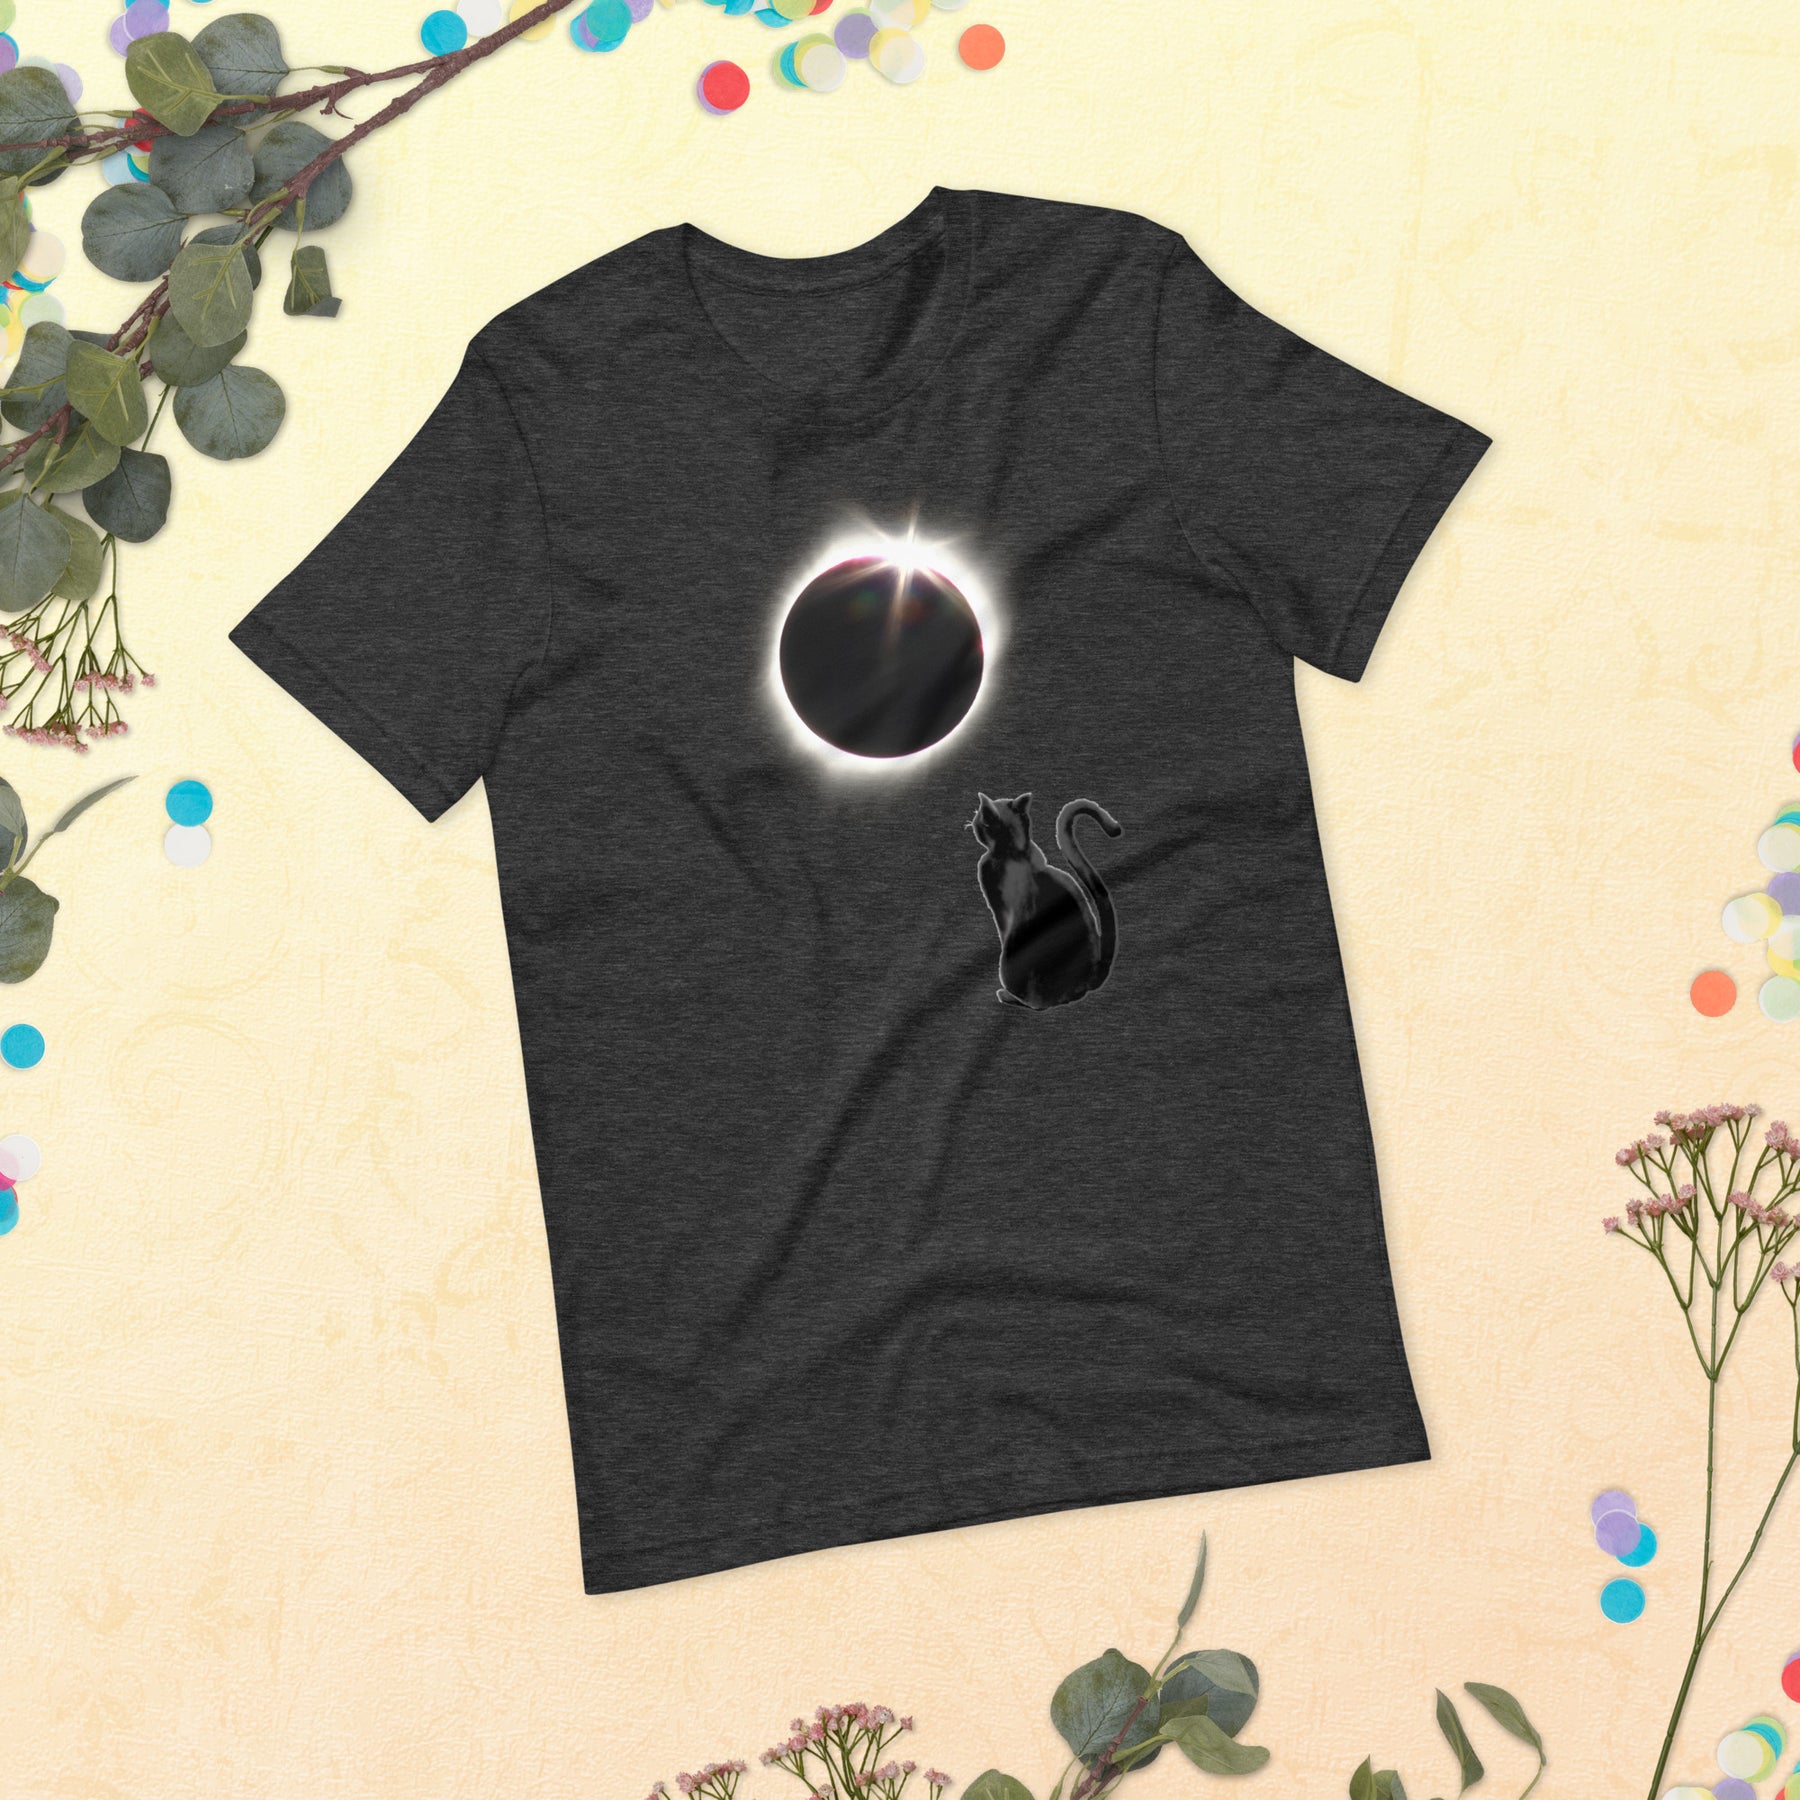 Cat Eclipse Shirt - Total Solar Eclipse - Astronomy Gift - Moon Phase